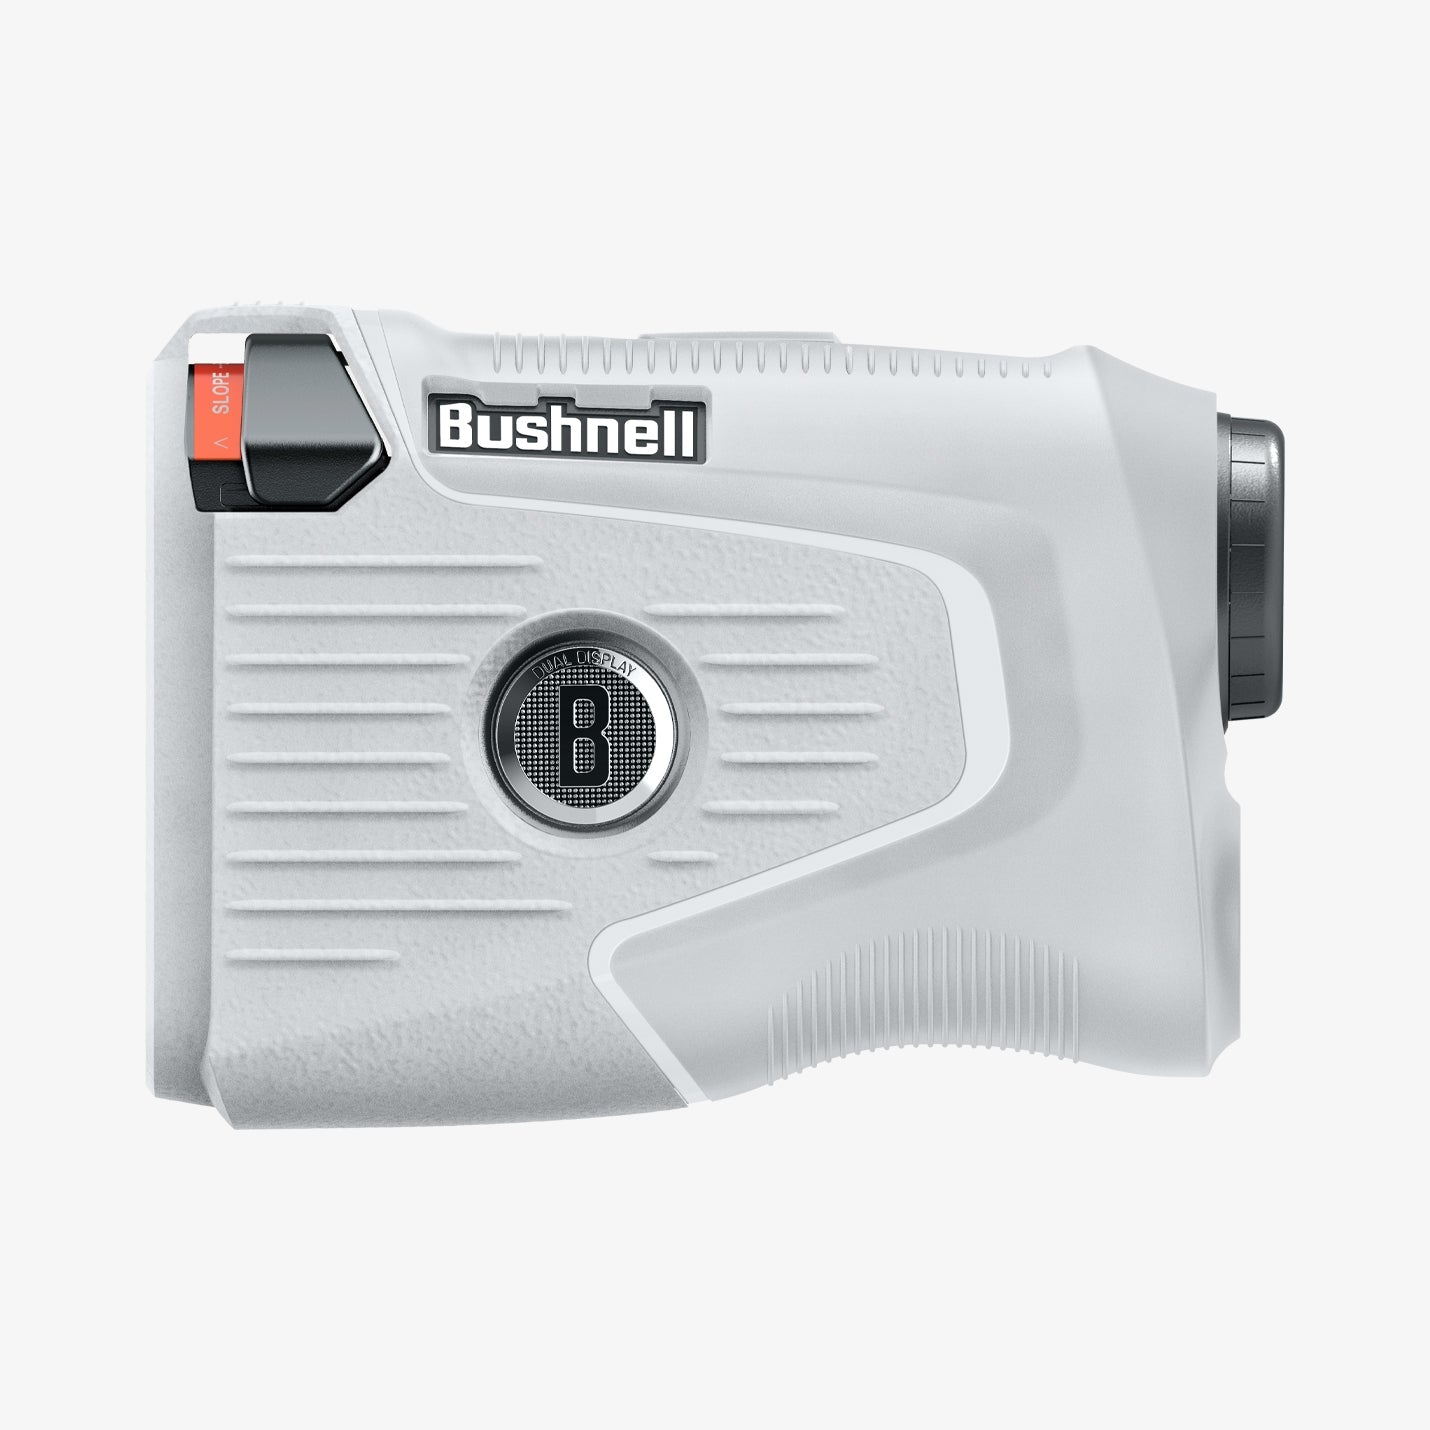 ACS06152 - Bushnell Pro X3 Rangefinder Case Silicone Fit in light gray showing the side